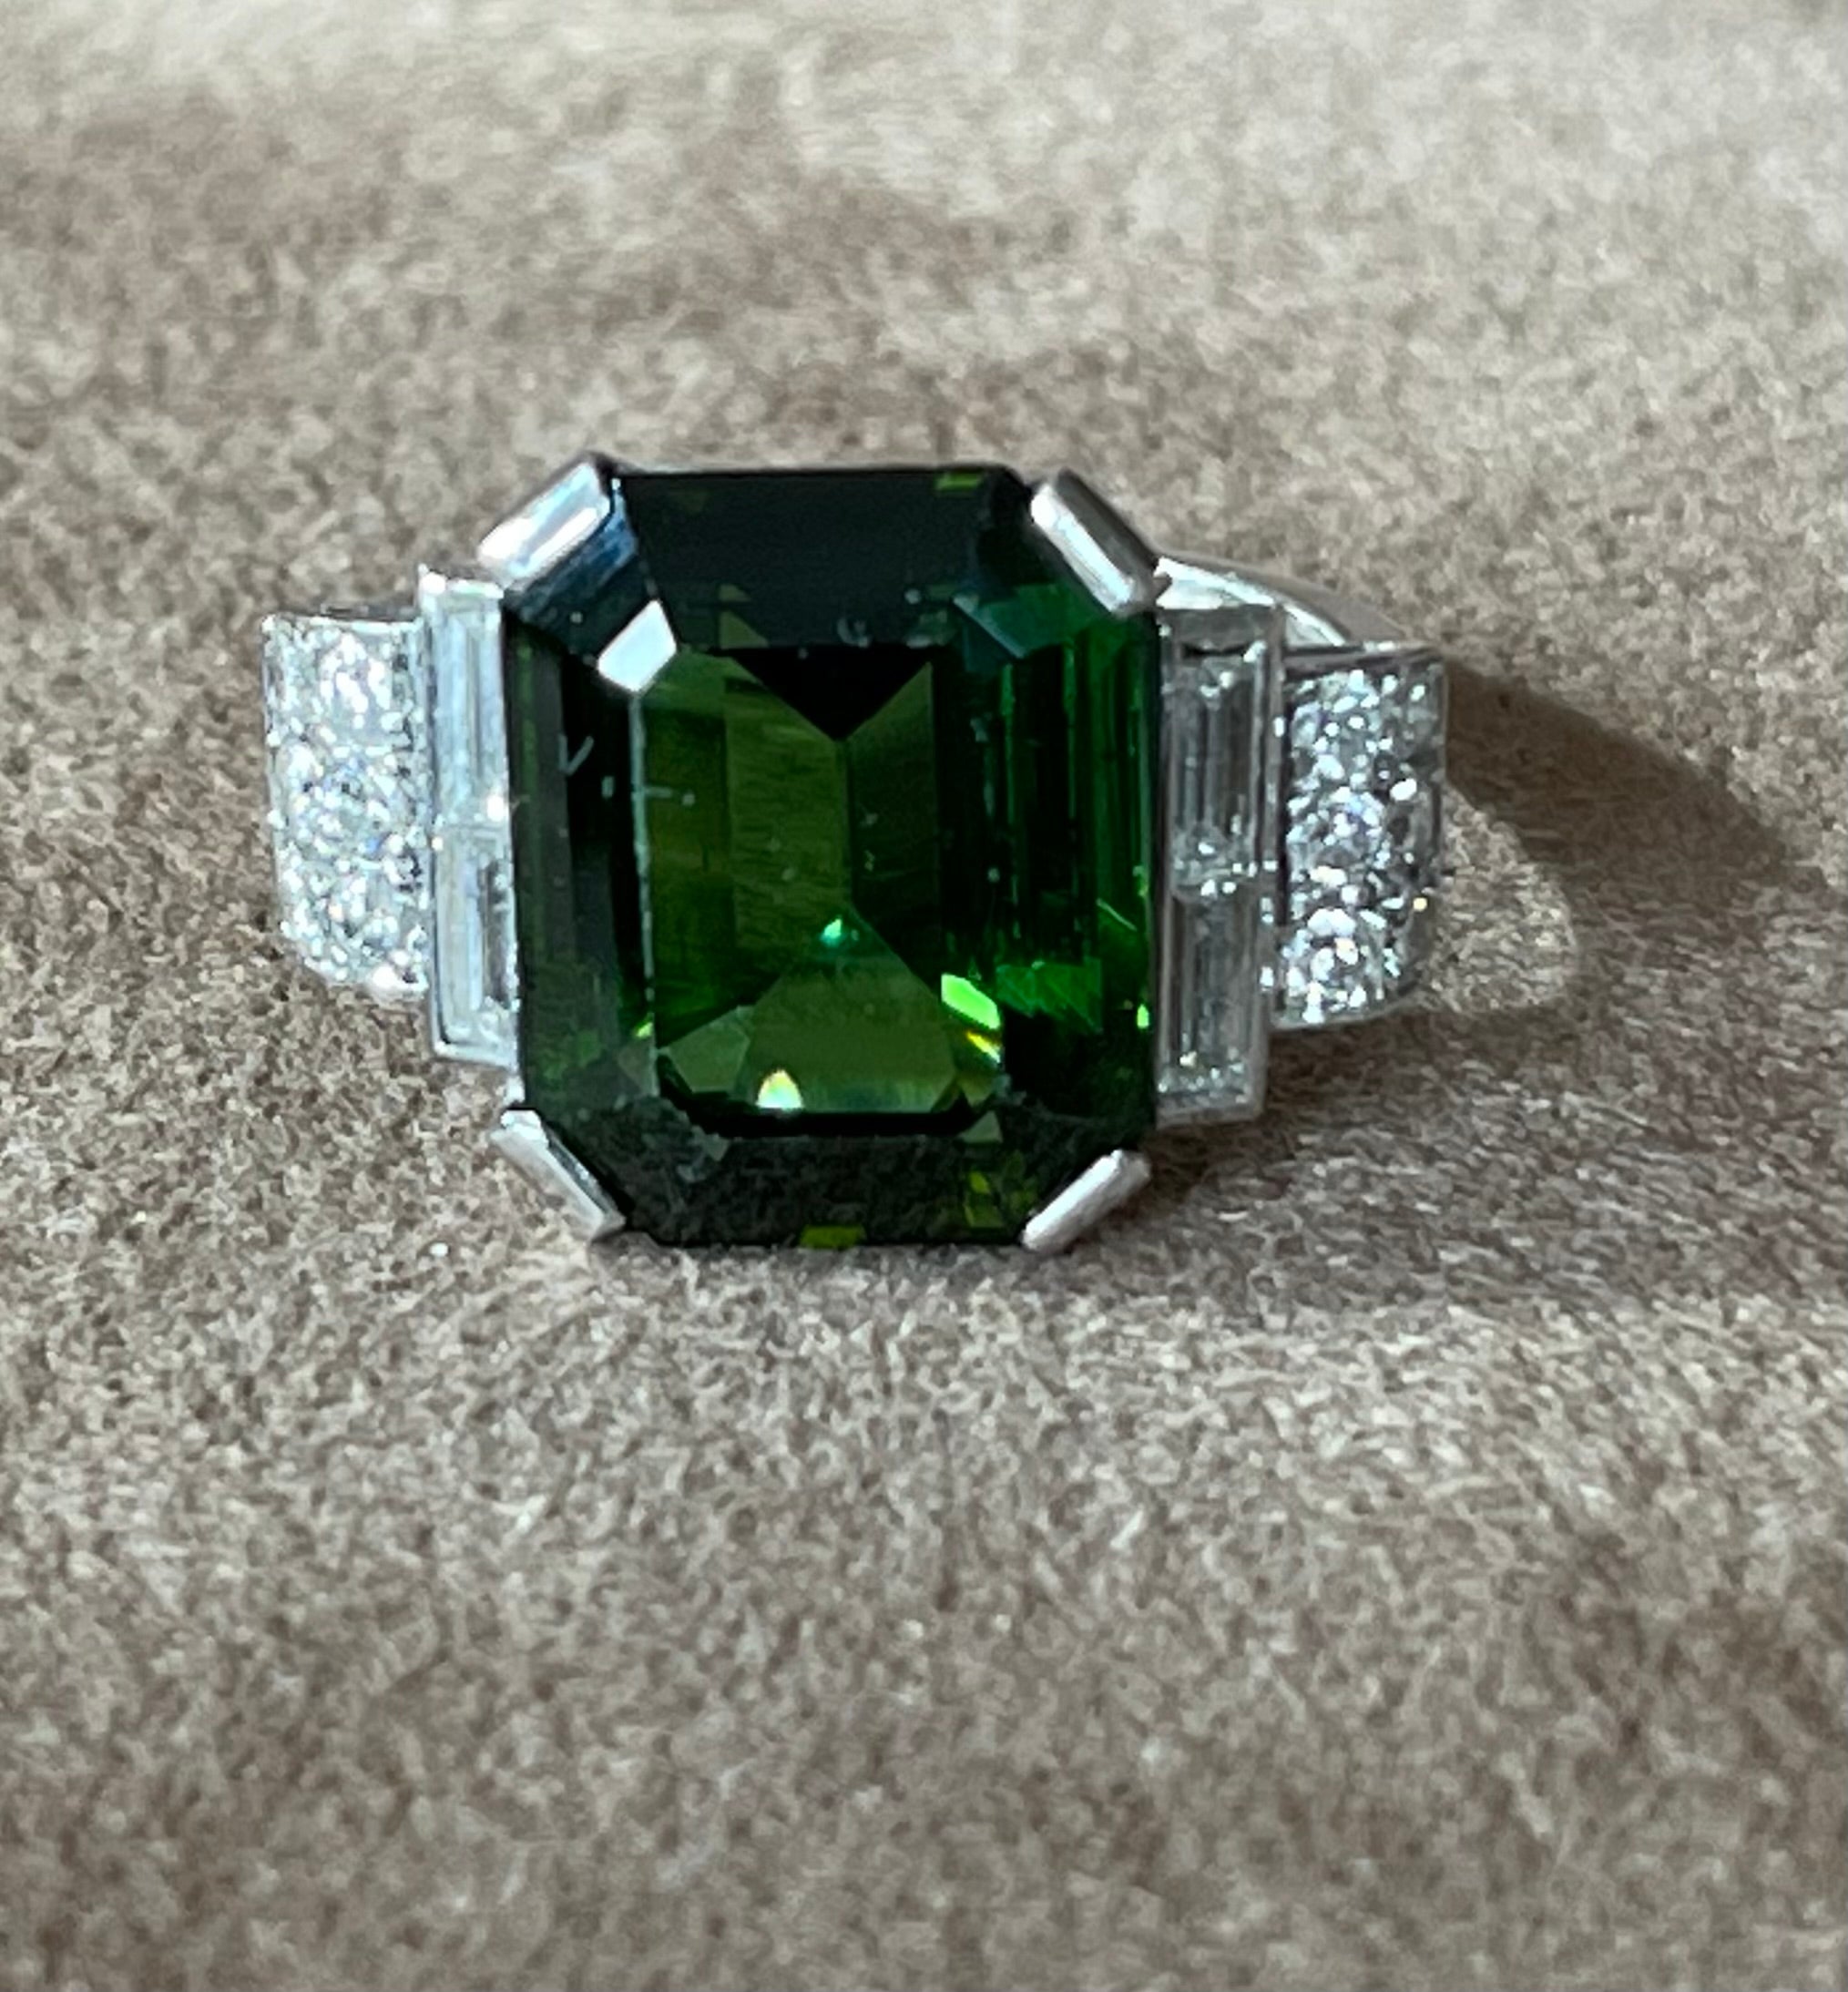 This classy tourmaline and diamond statement ring is crafted in solid 18-karat white gold, weighing 7.34 grams. Displaying a prominent prong-set, rectangular tourmaline of deep green color, weighing approximately 6 carats, flanked by 2 baguette